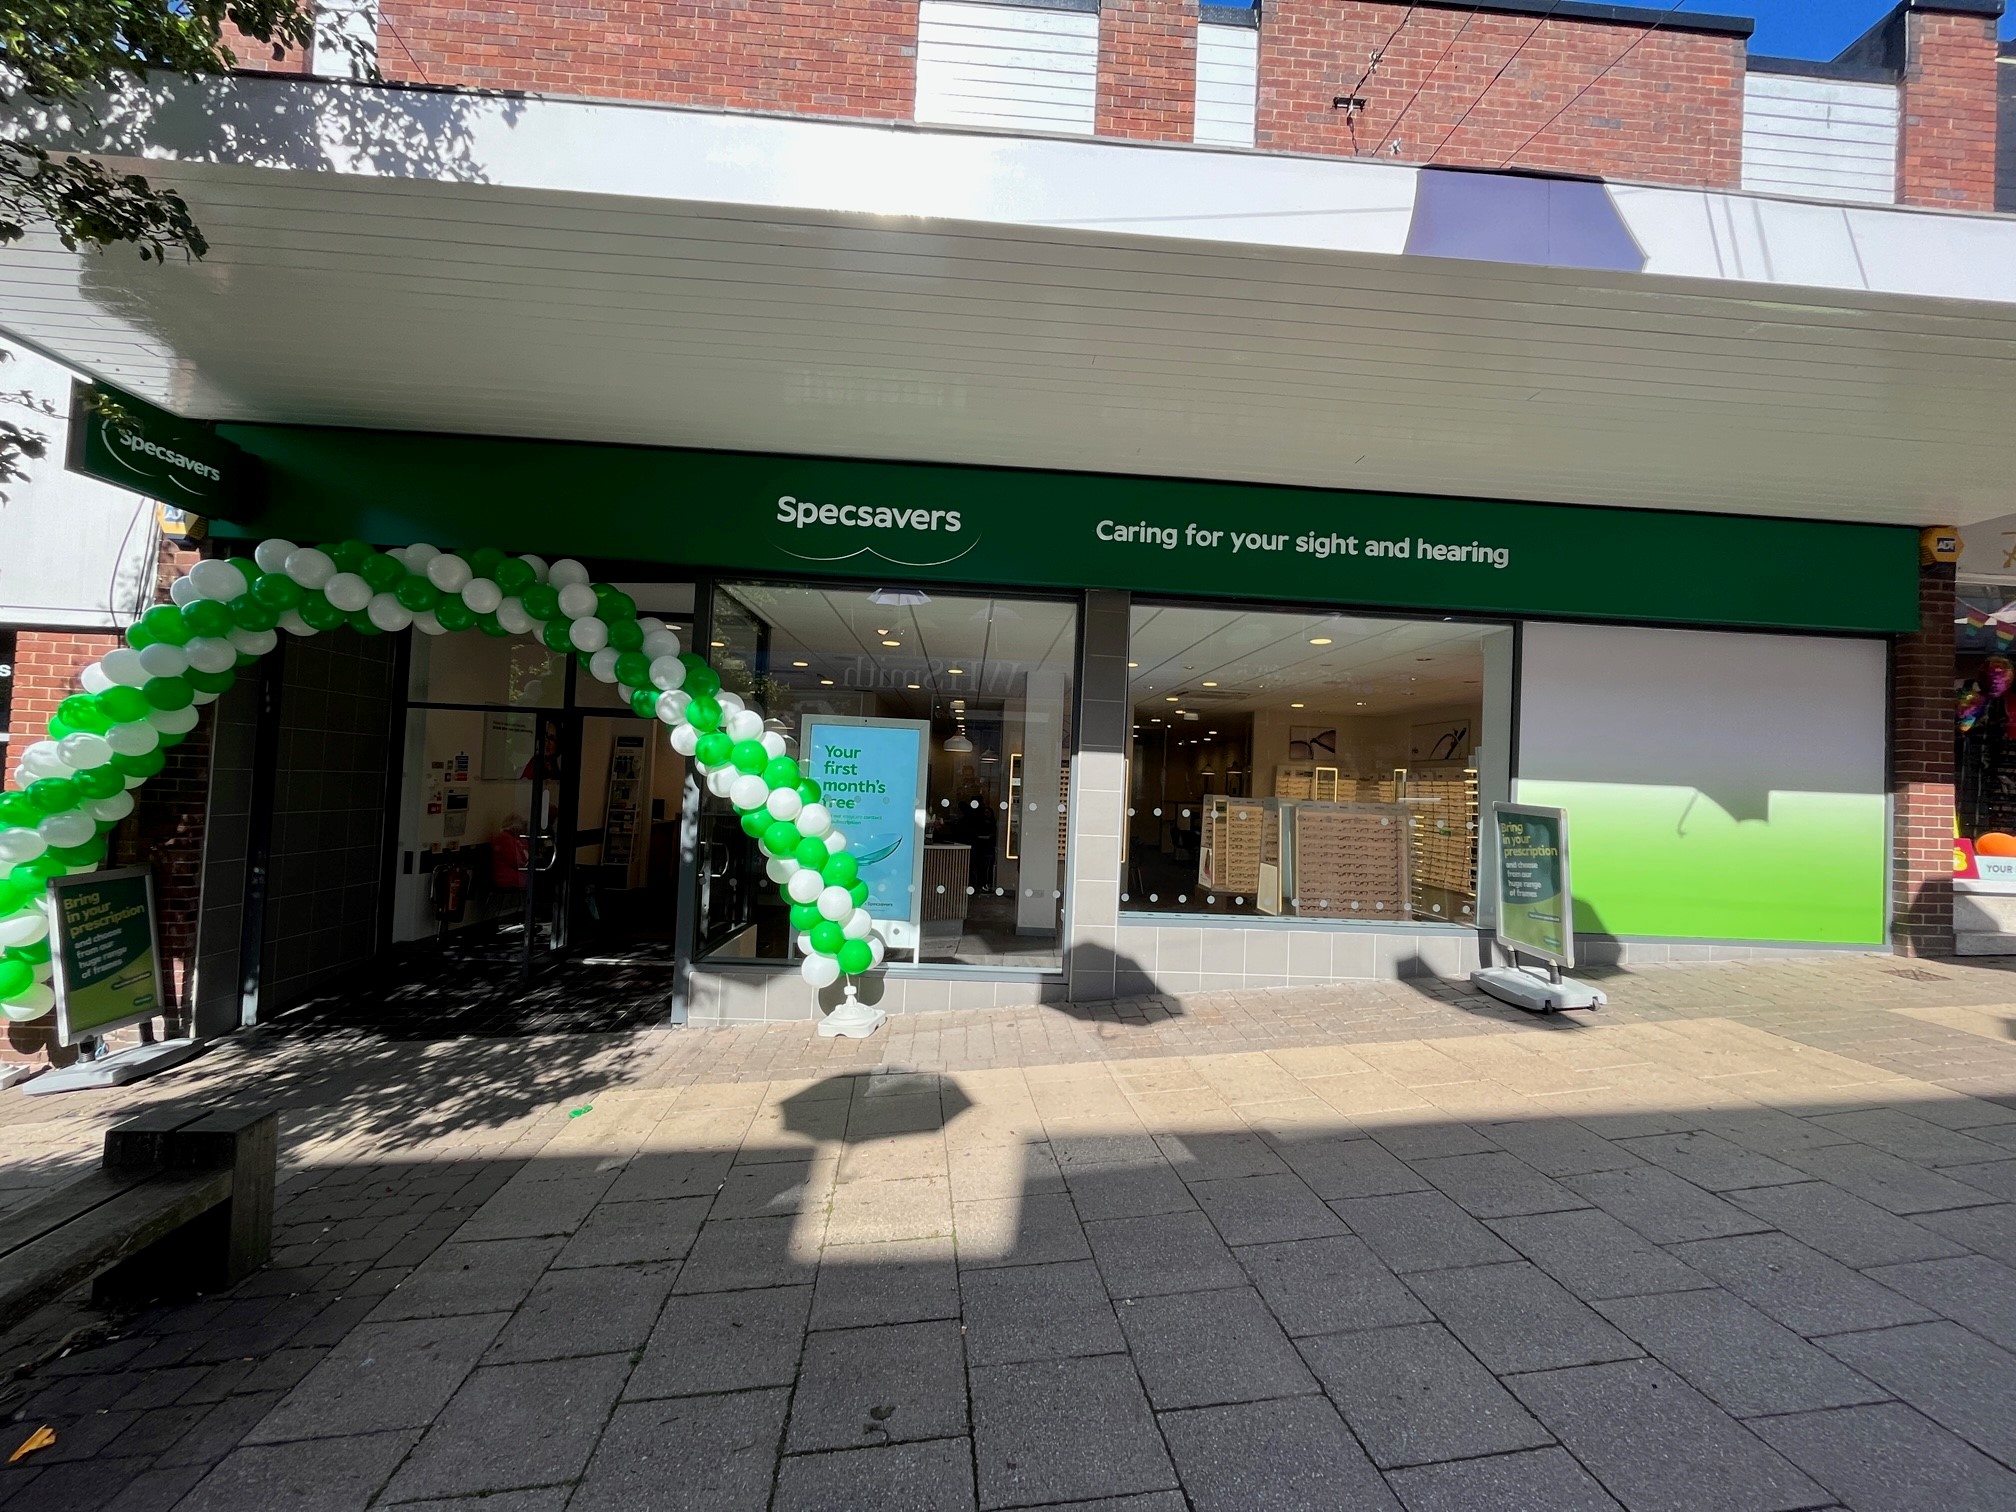 Images Specsavers Opticians and Audiologists - Alfreton